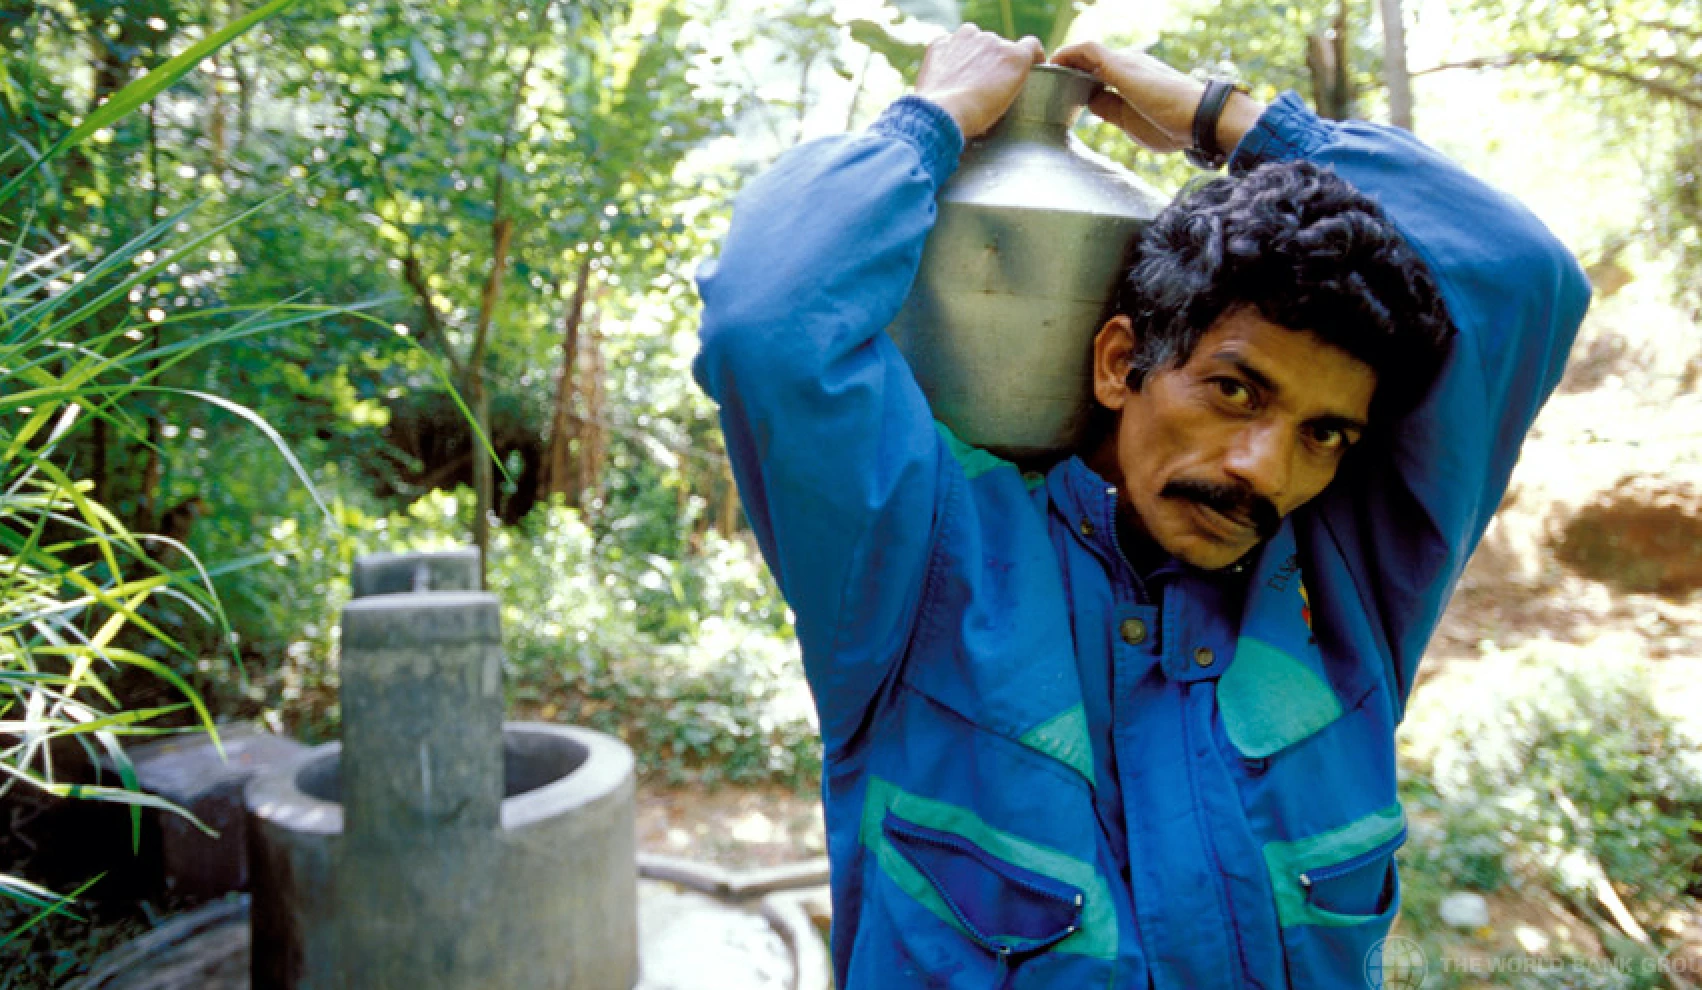 Man collecting drinking water from community well in Sri Lanka